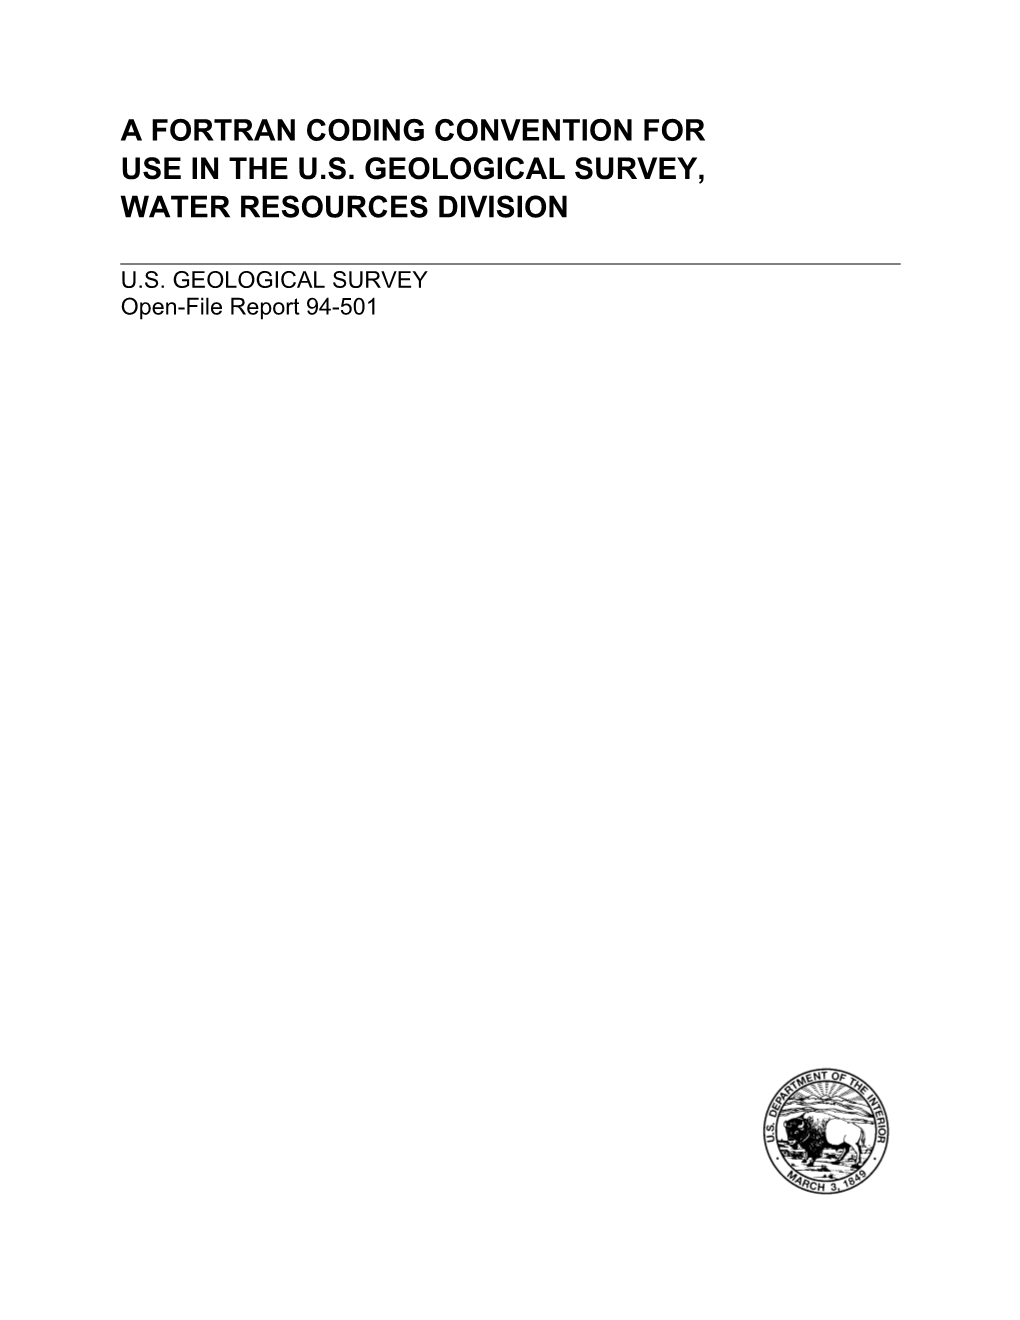 A Fortran Coding Convention for Use in the U.S. Geological Survey, Water Resources Division